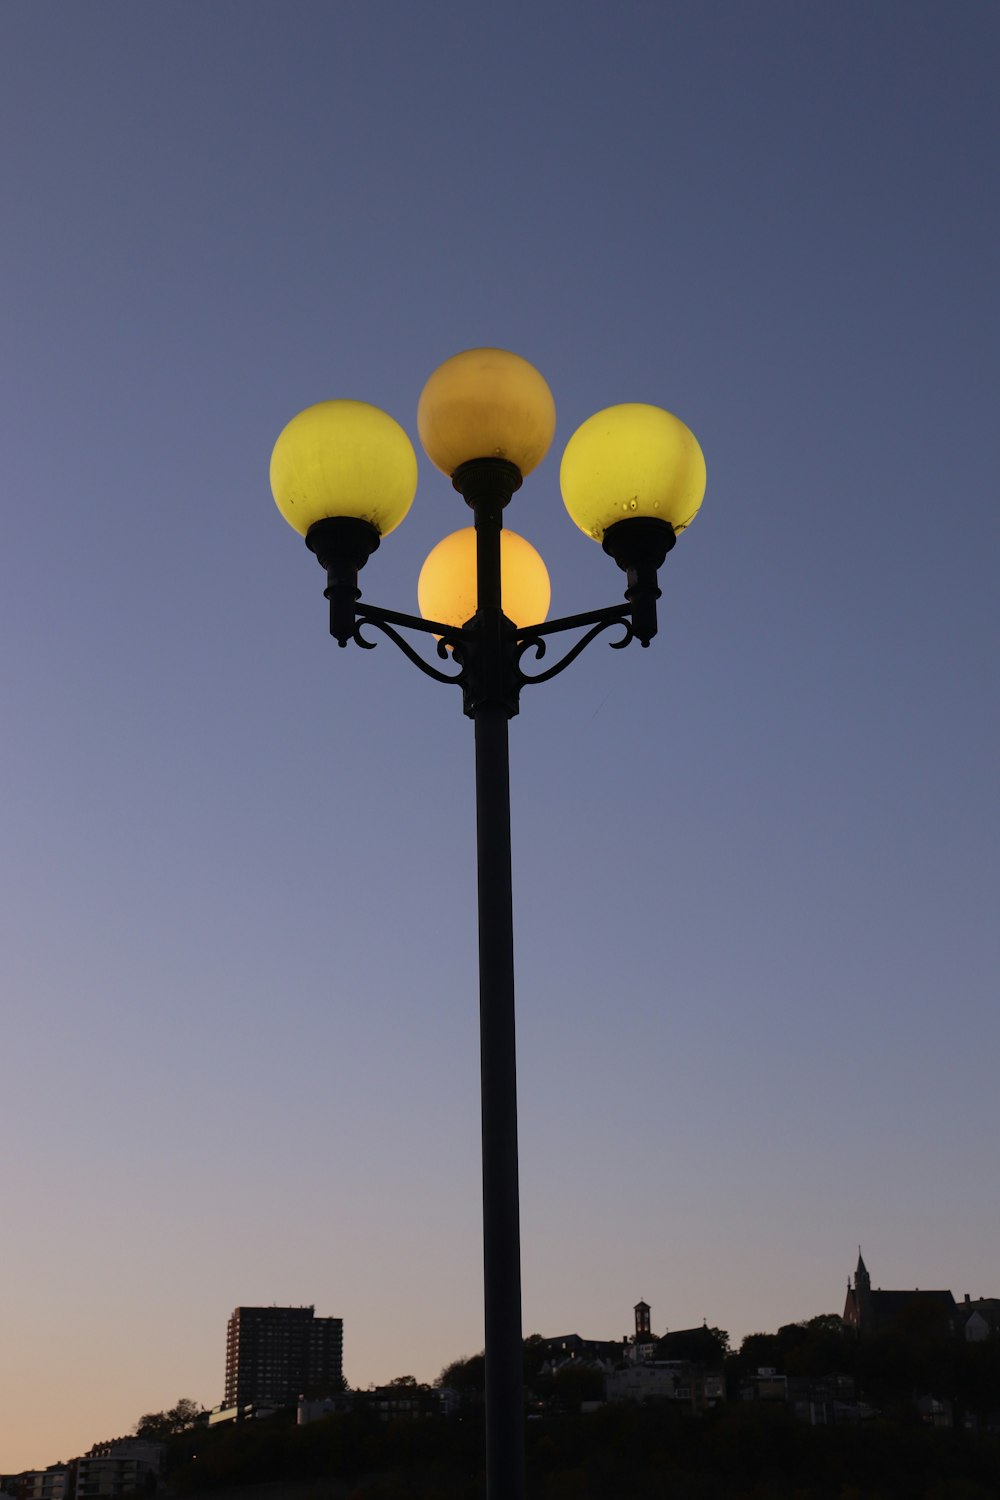 a street light with three yellow lamps on top of it